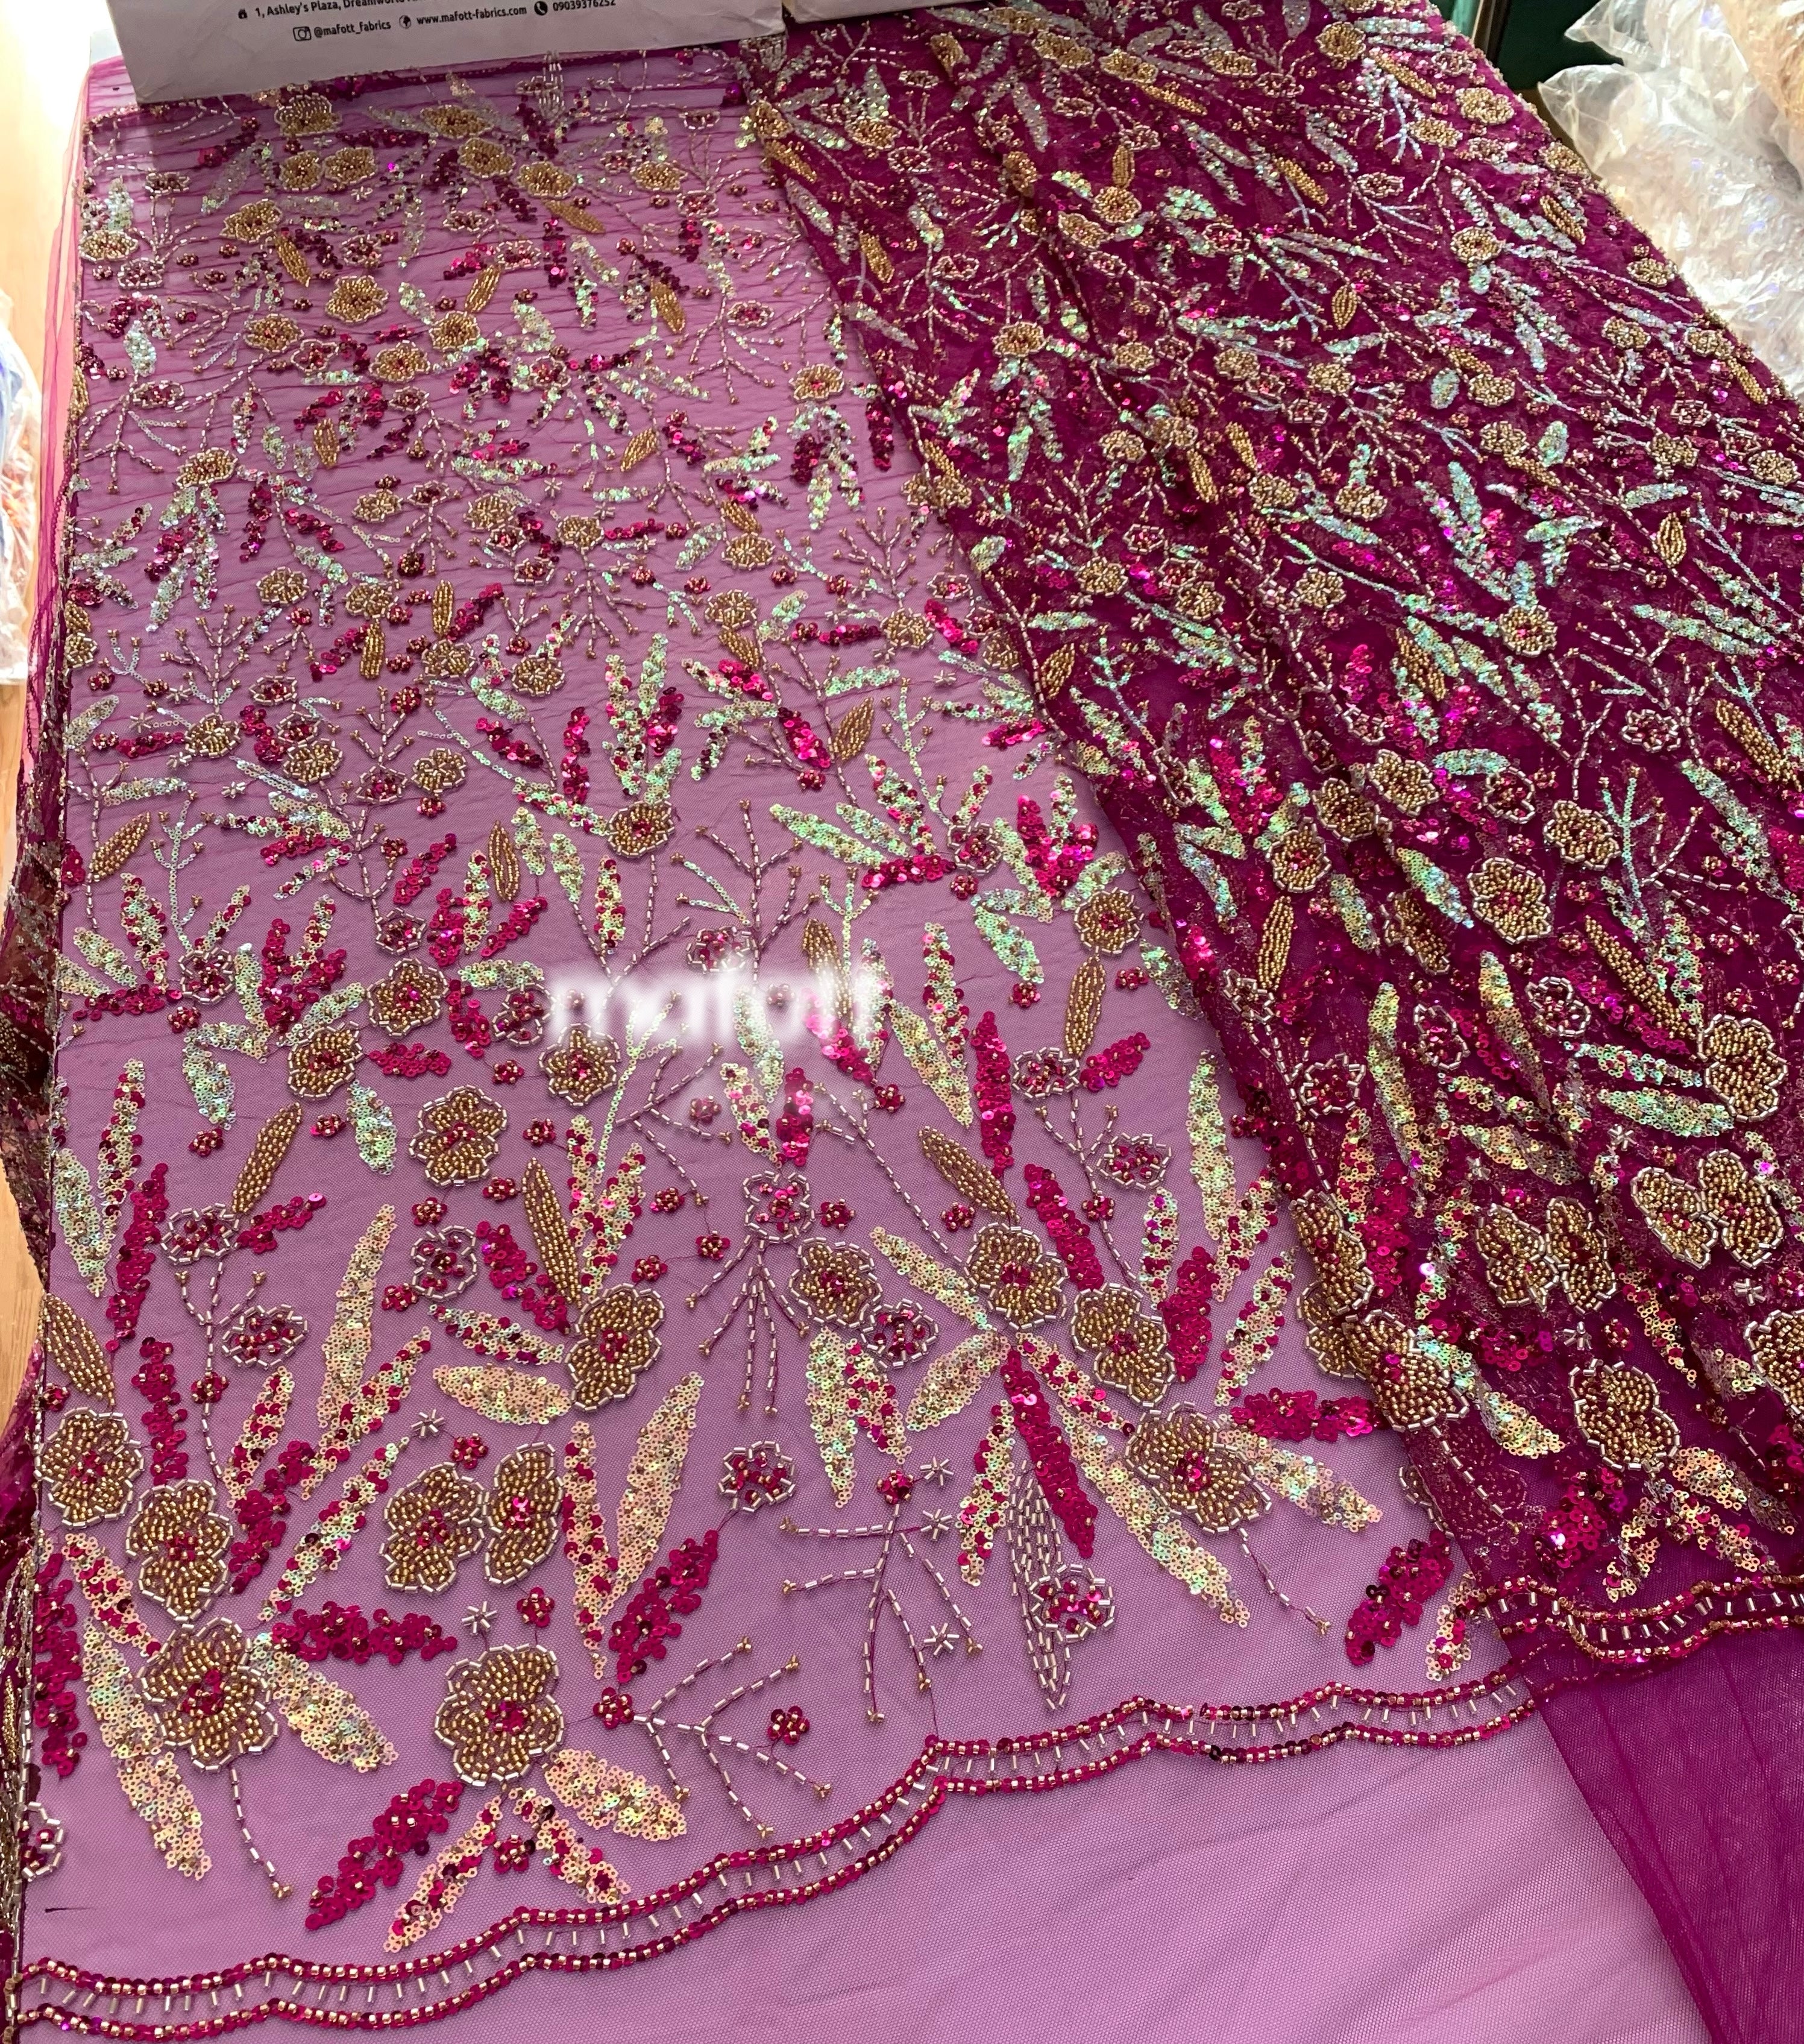 Dian Bridal - Price is for 1 yard (Minimum is 2yards)